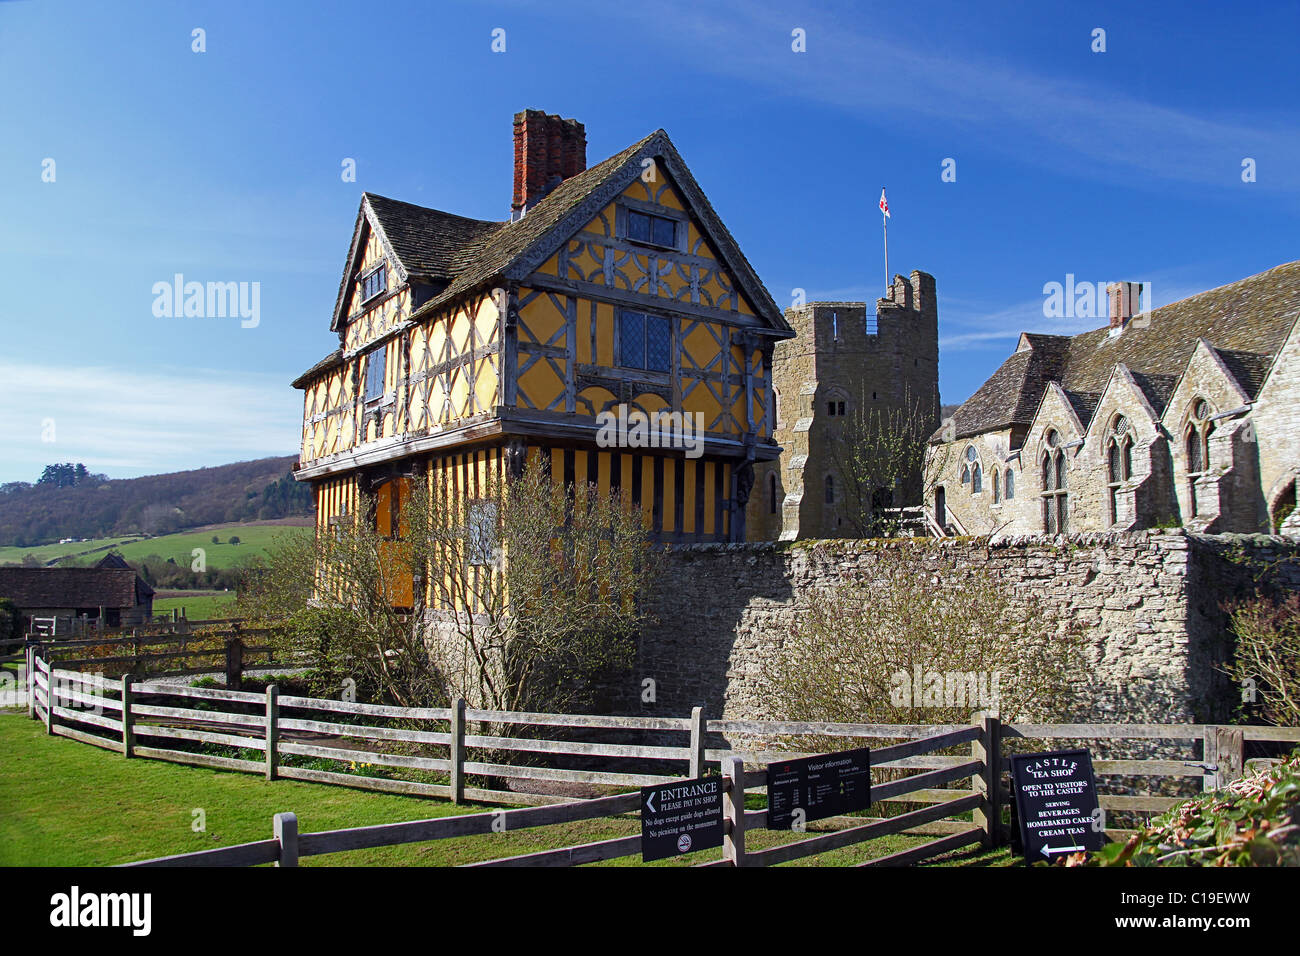 The colorful half-timbered gatehouse at the entrance to Stokesay Castle, Shropshire, England, UK Stock Photo